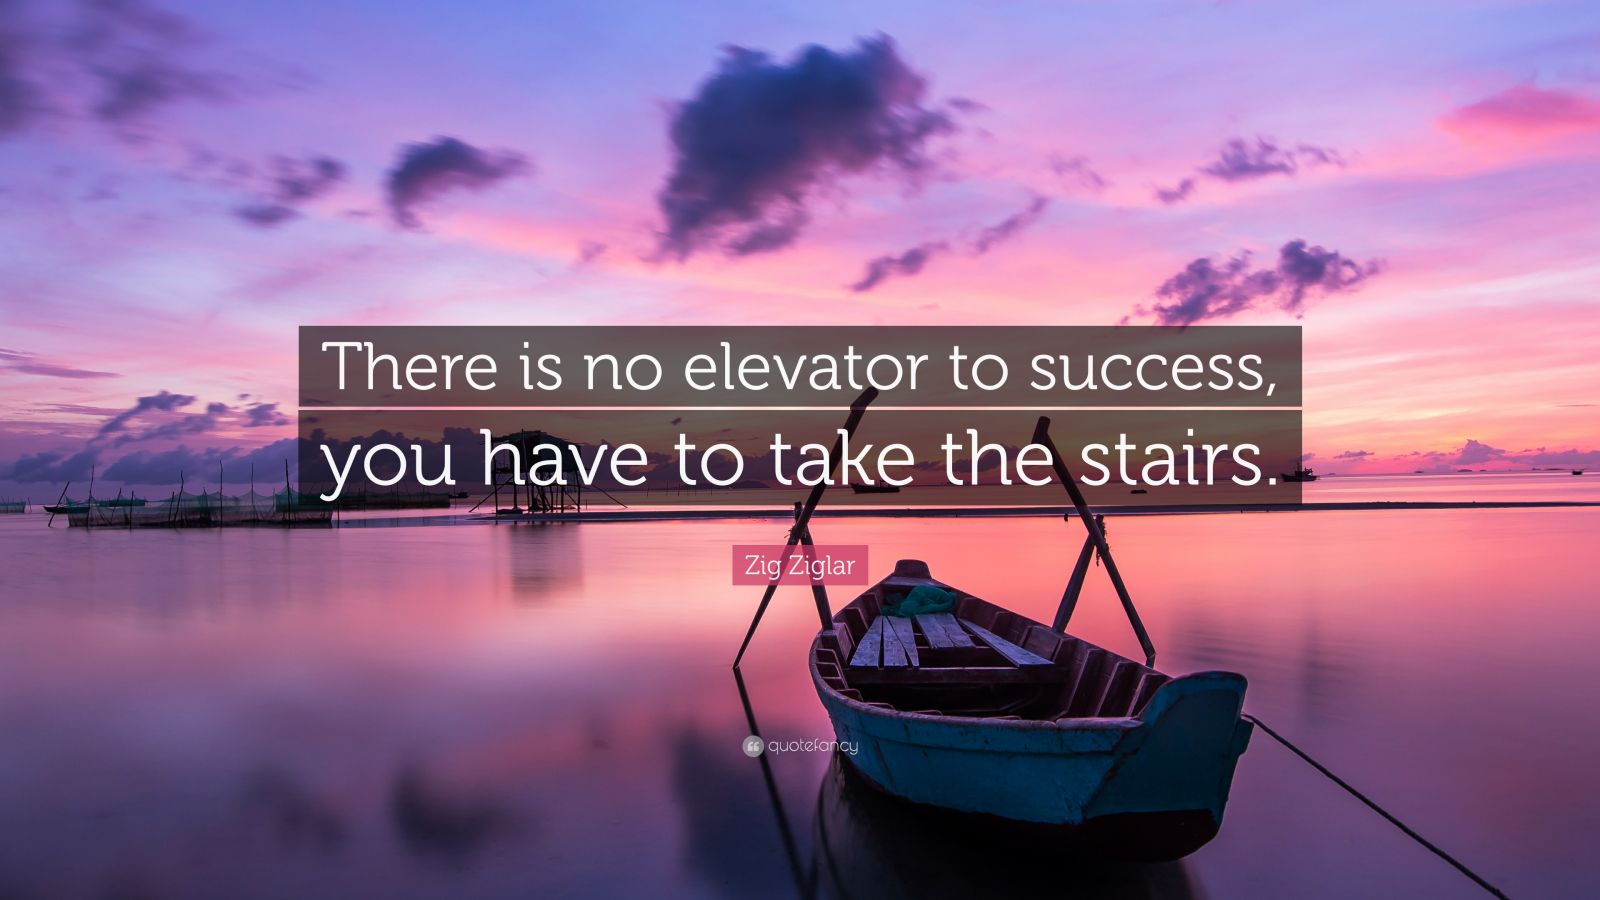 Zig Ziglar Quote: "There is no elevator to success, you have to take the stairs." (12 wallpapers ...